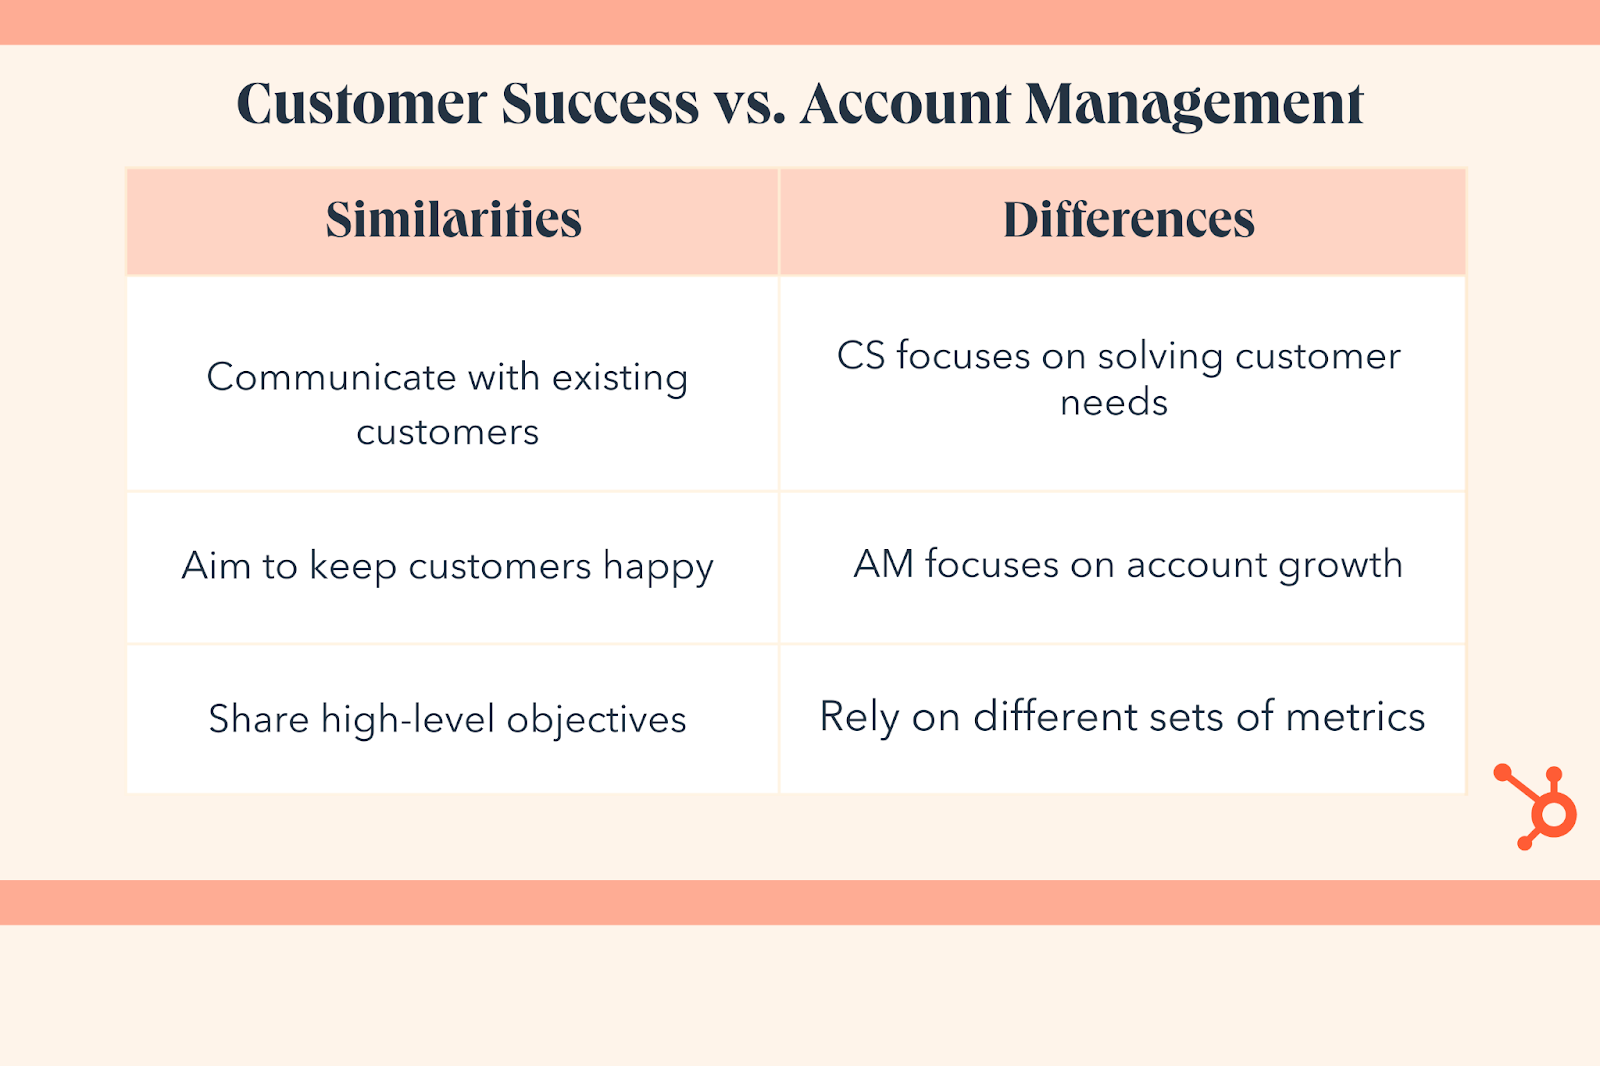 customer success vs account management. Similarities: communicate with existing customers, aim to keep customers happy, share high-level objectives. Differences: cs focuses on solving customer needs, am focuses on account growth, rely on different metrics